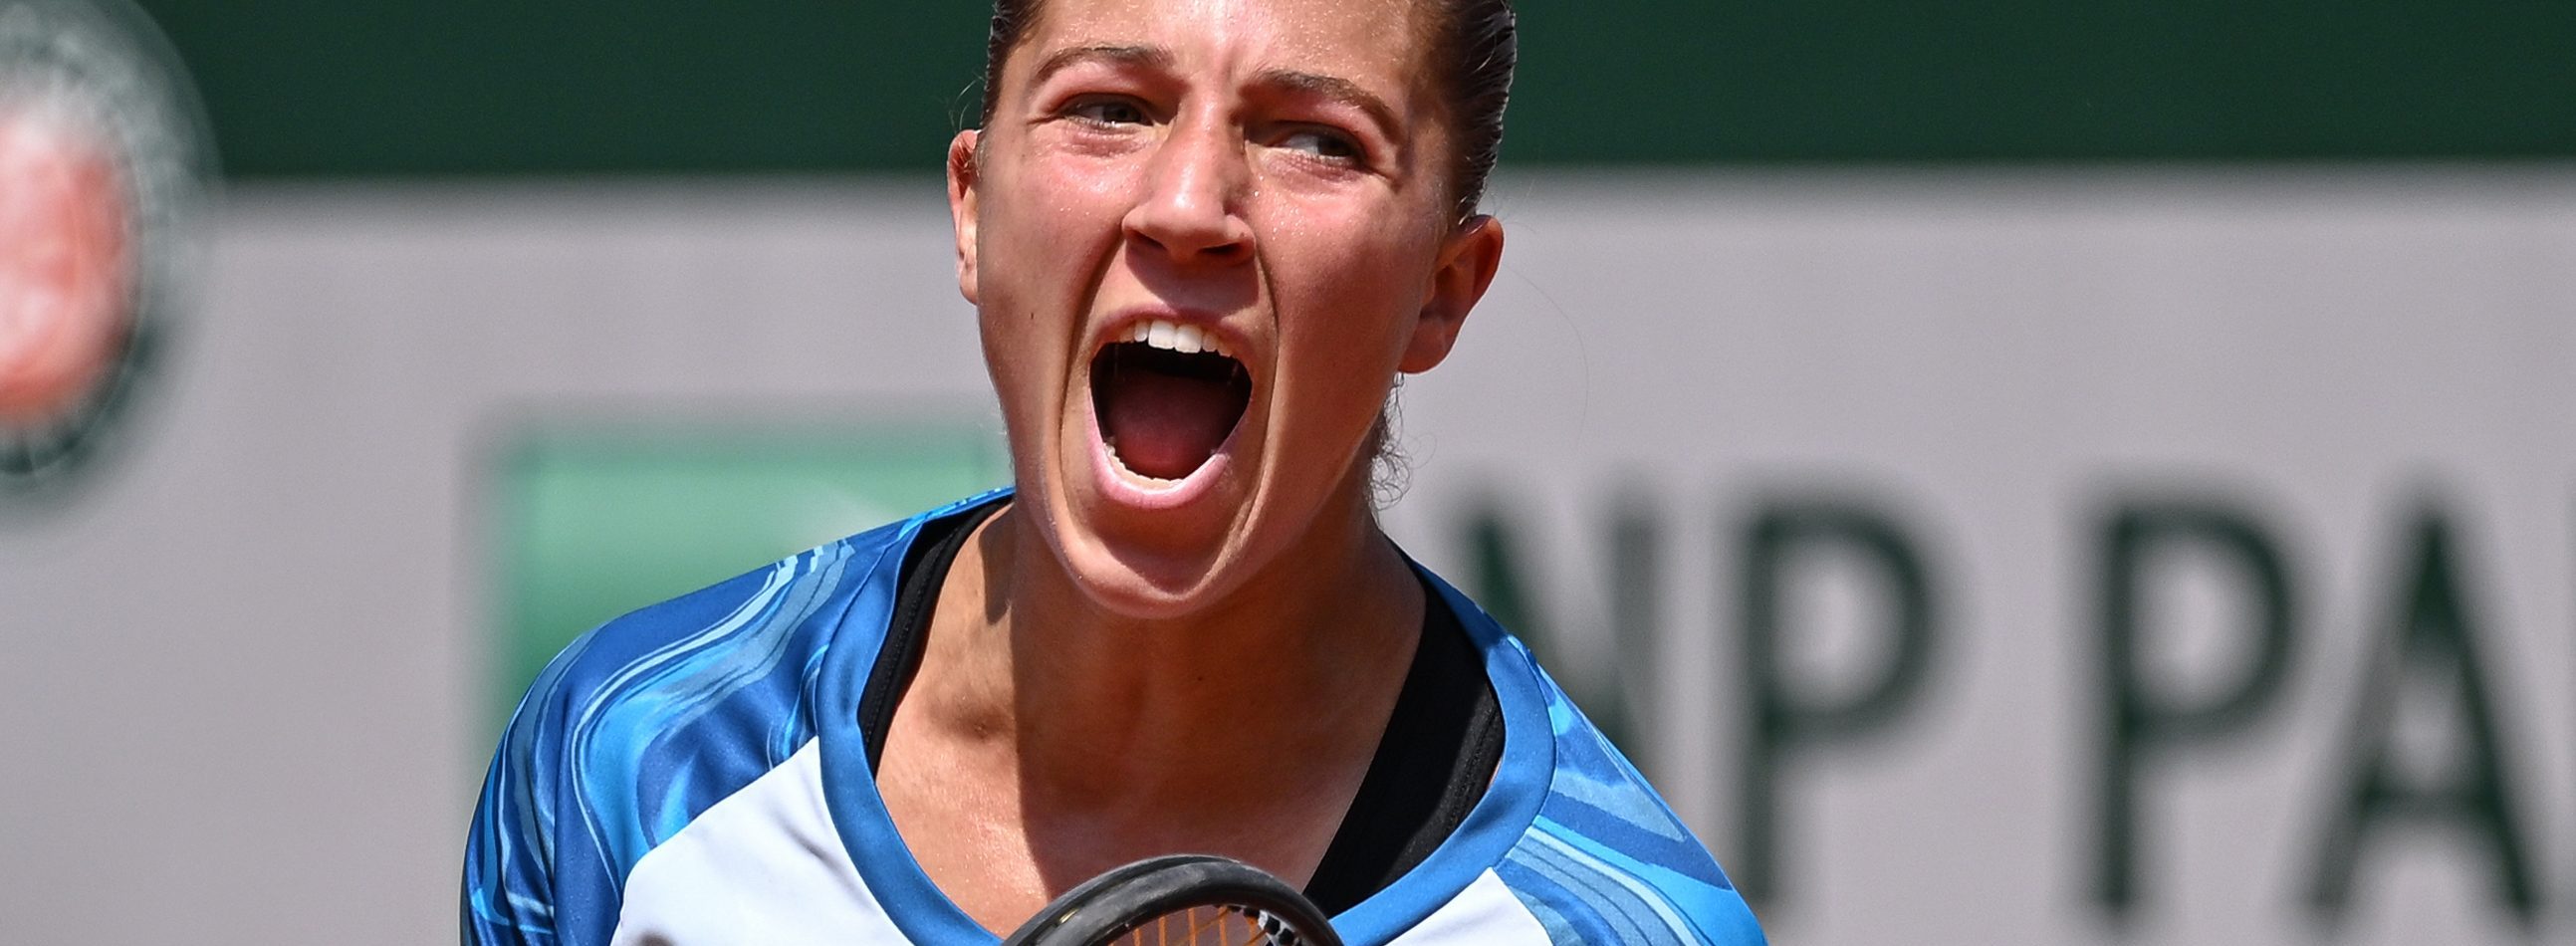 France's Diane Parry celebrates after winning against Ukraine's Anhelina Kalinina at the end of their women's singles match on day three of the Roland-Garros Open tennis tournament at the Court Simonne-Mathieu in Paris on May 30